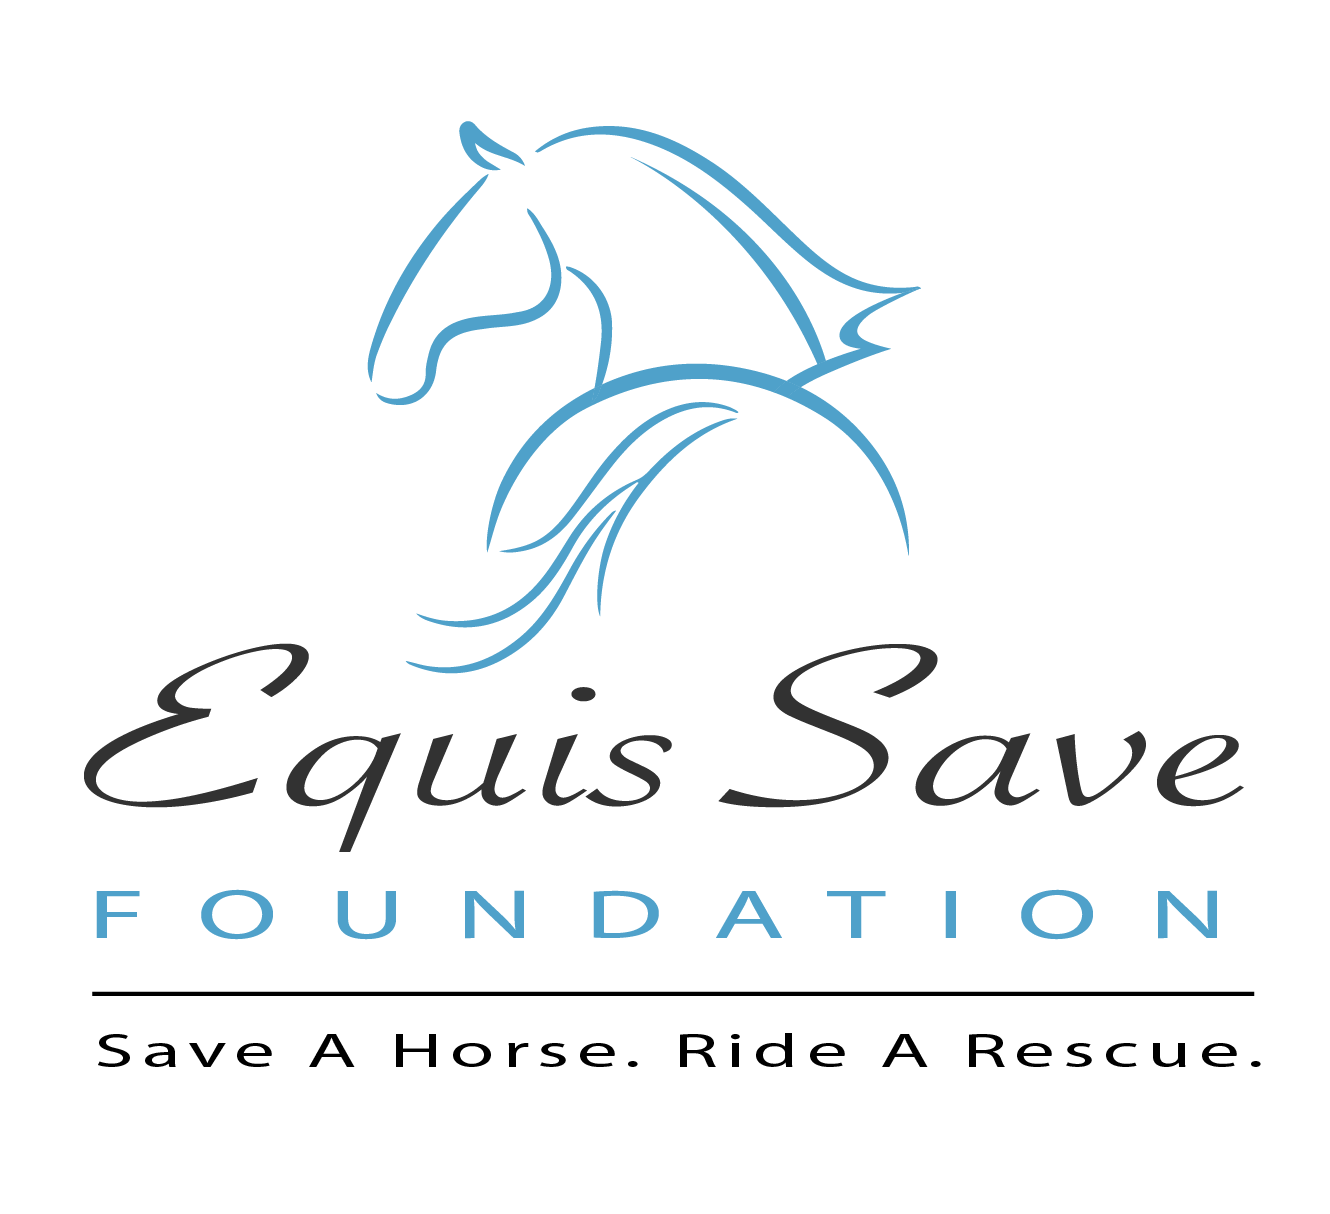 A Rescue for Abused & Neglected Horses